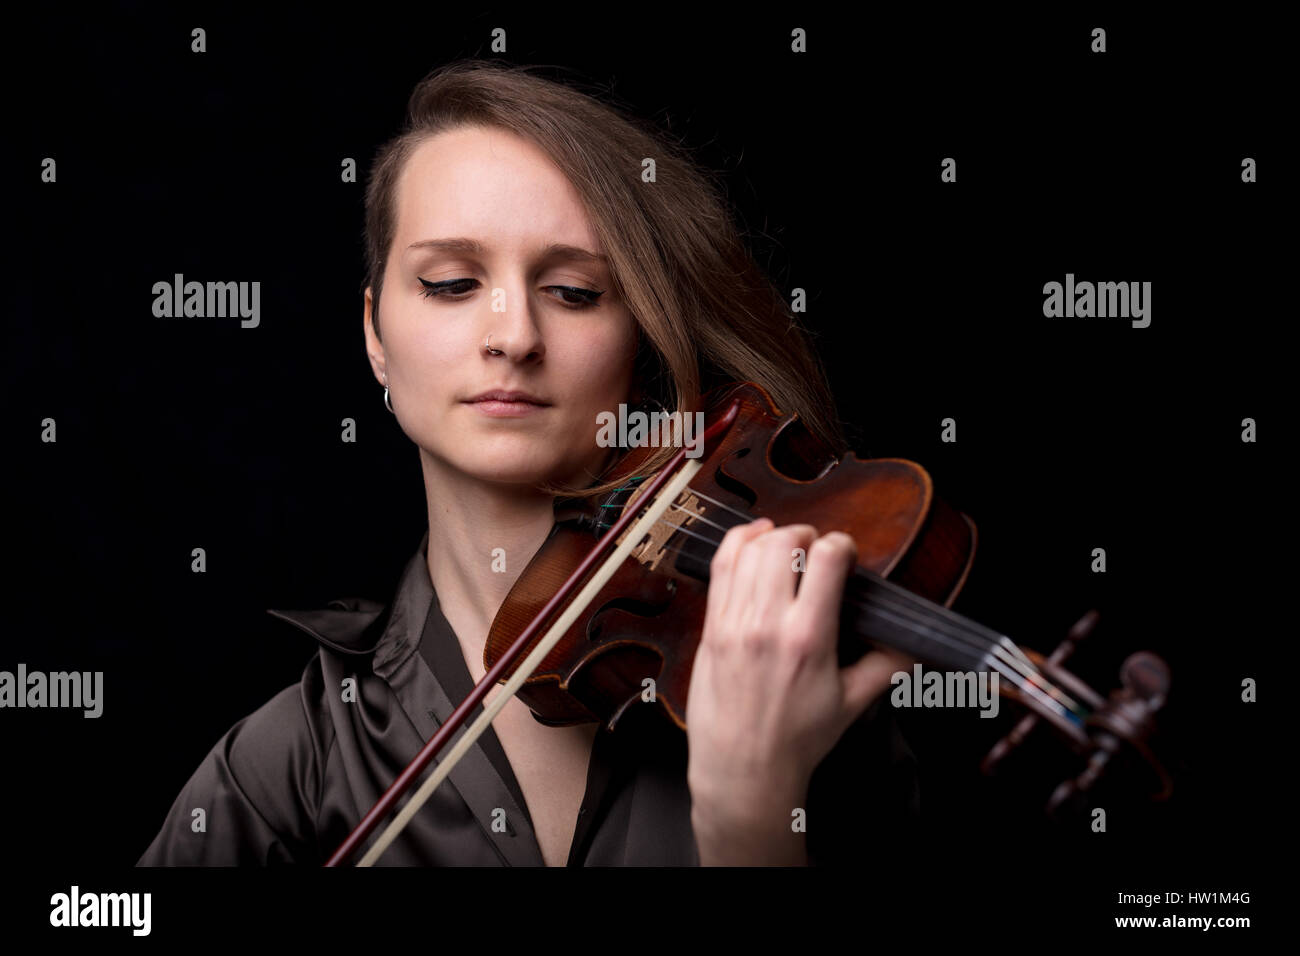 portrait of a young beautiful woman violinist player playing her instrument on her shoulder holding bow. portrait in a blurred dark room in background Stock Photo